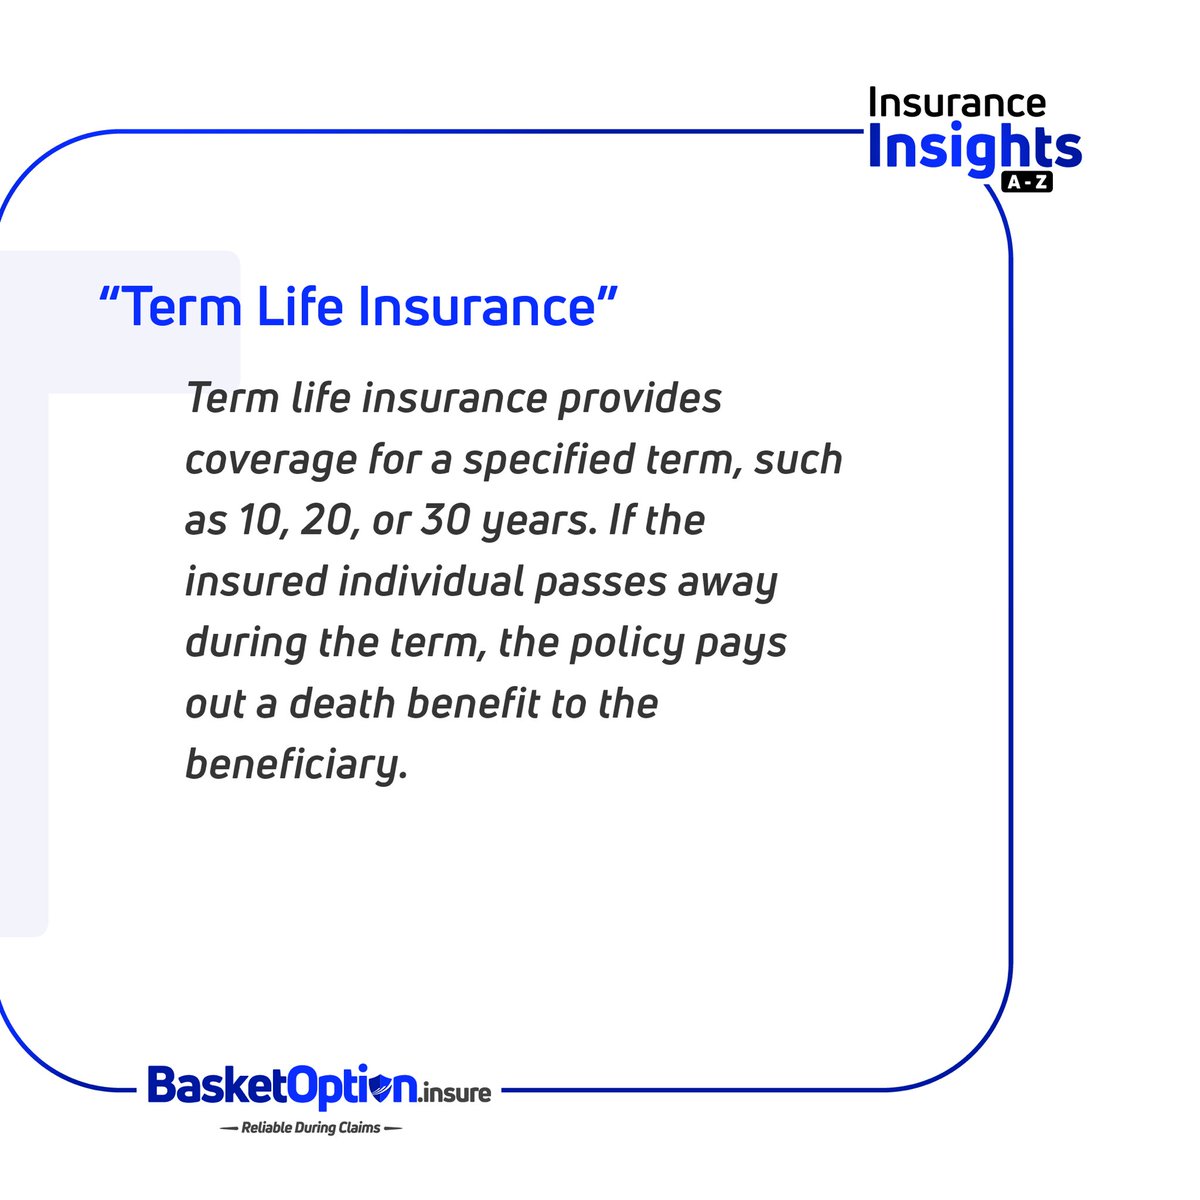 On Day 20 of our 26-day journey through insurance, let’s explore the concept of “Term Life Insurance”. 
Stay tuned for more insights! 

#Insurance #BasketOptionInsure #Termlifeinsurance #stockmarketcrash #cloudsecurity #Worldle859 #ThursdayThoughts #GV100